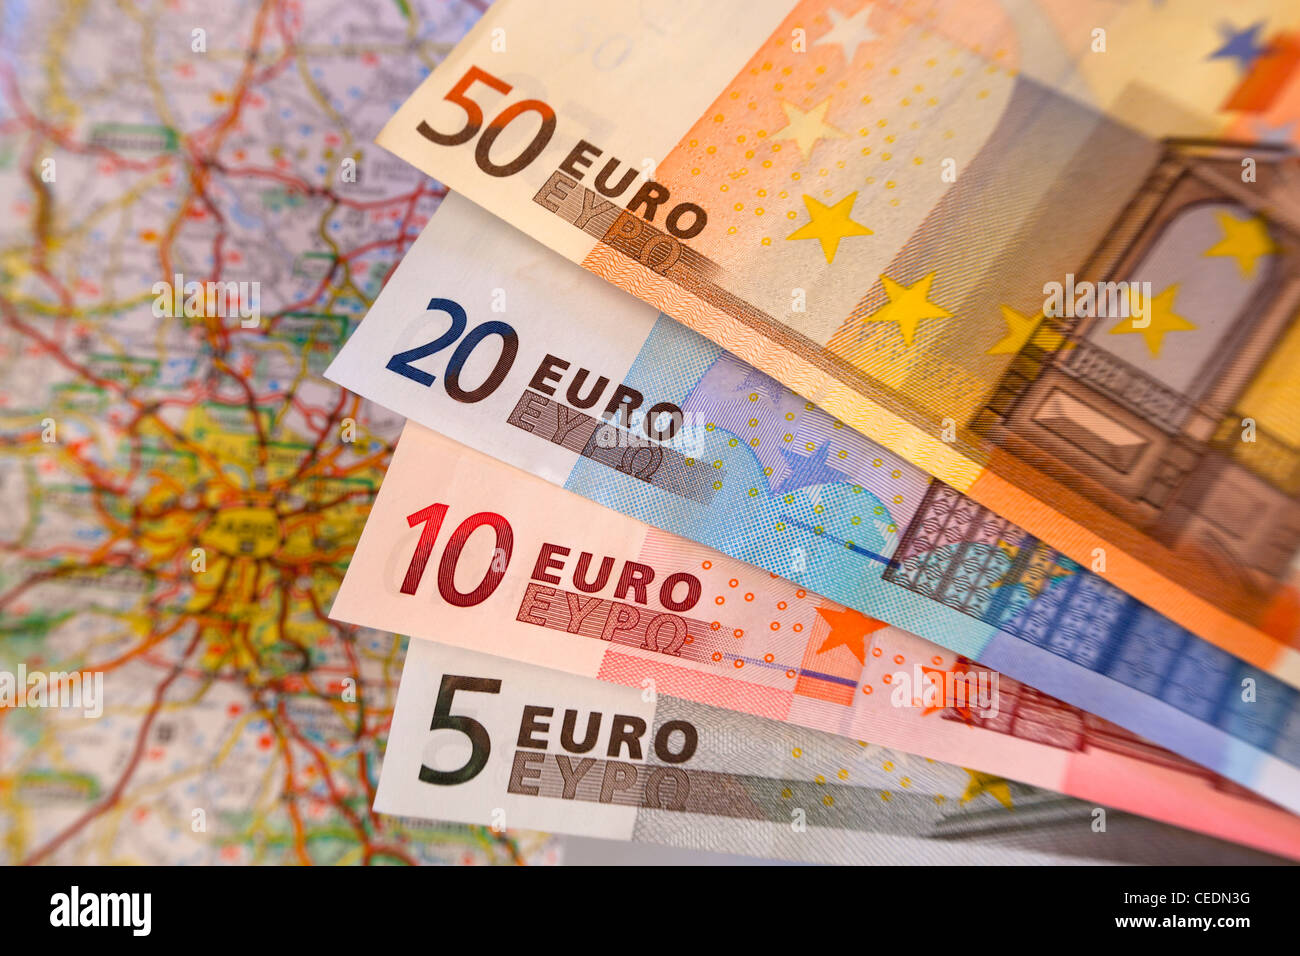 Fan of different size Euro notes currency with map in background Stock Photo